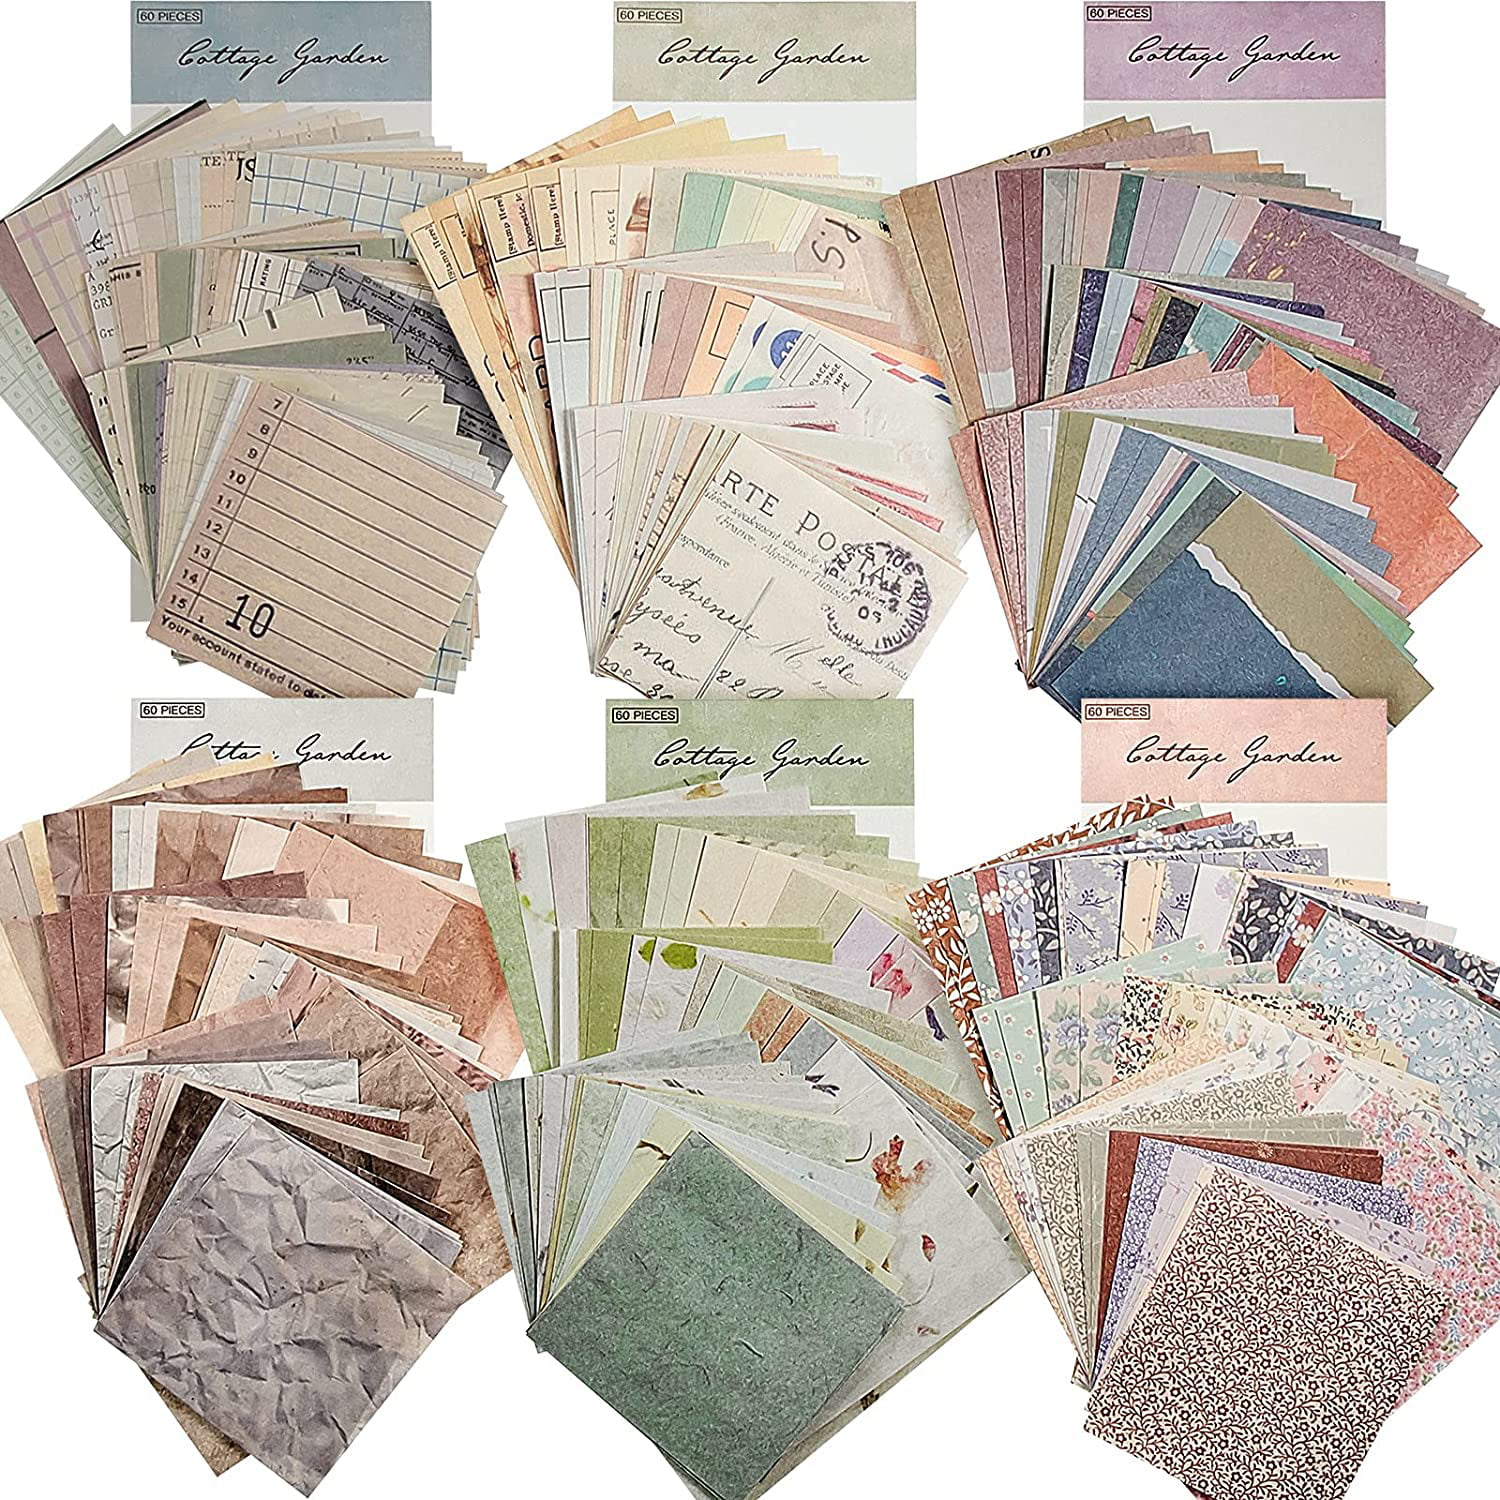 Travel Journal Aesthetic Retro Decorative Paper for Scrapbooking 6 Sets 360 Sheets Vintage Scrapbook Paper Supplies DIY Journaling Supplies for Writing Drawing 